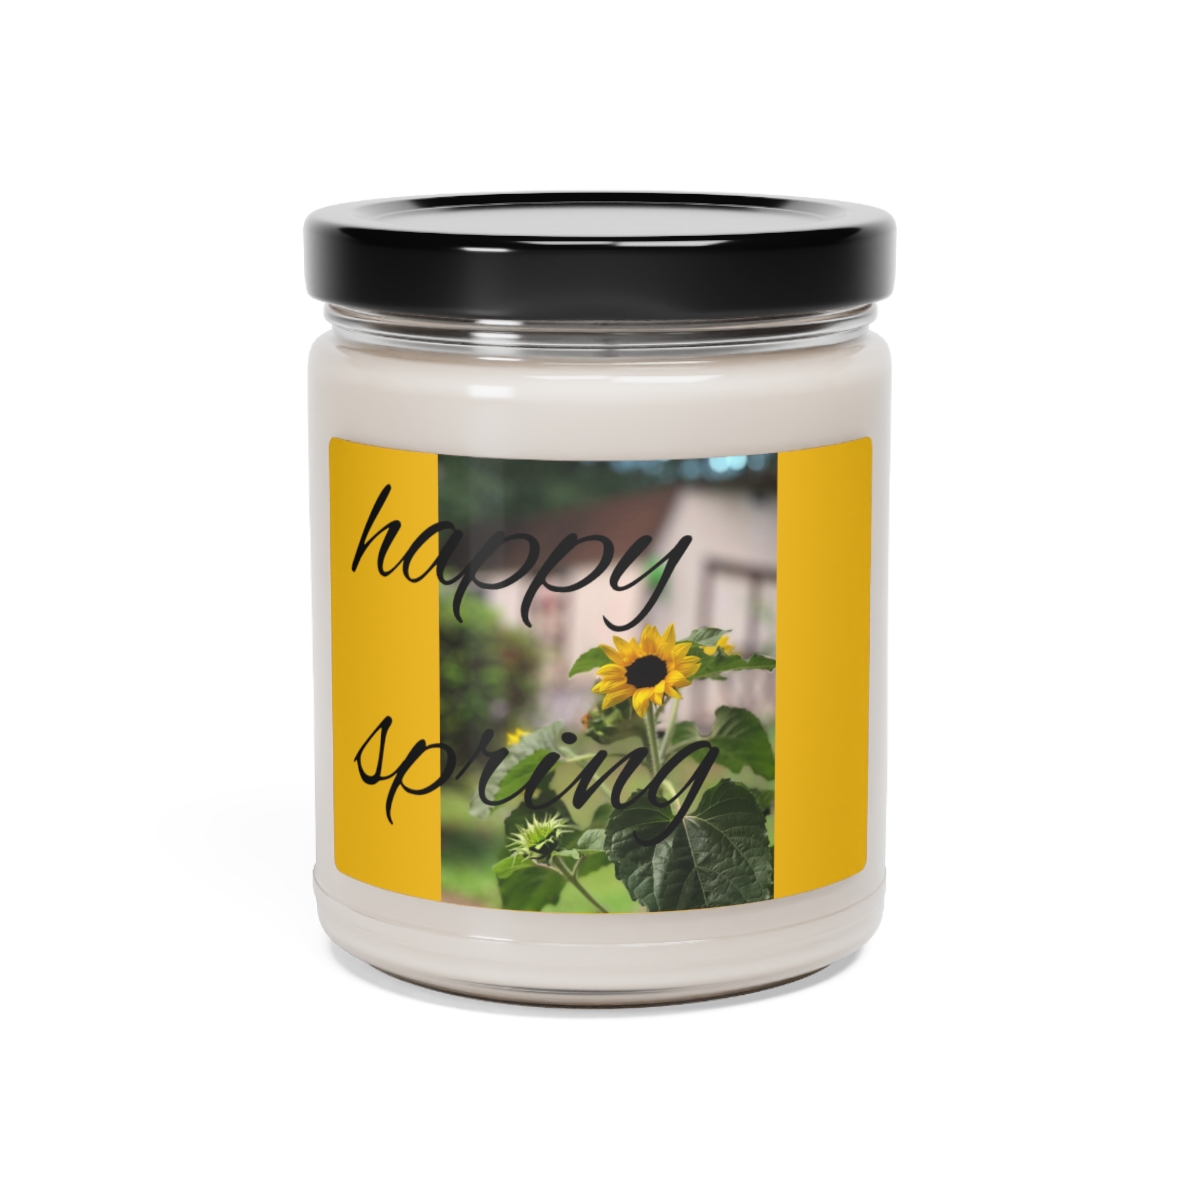 Light up the spring! Scented Soy Candle, 9oz product main image